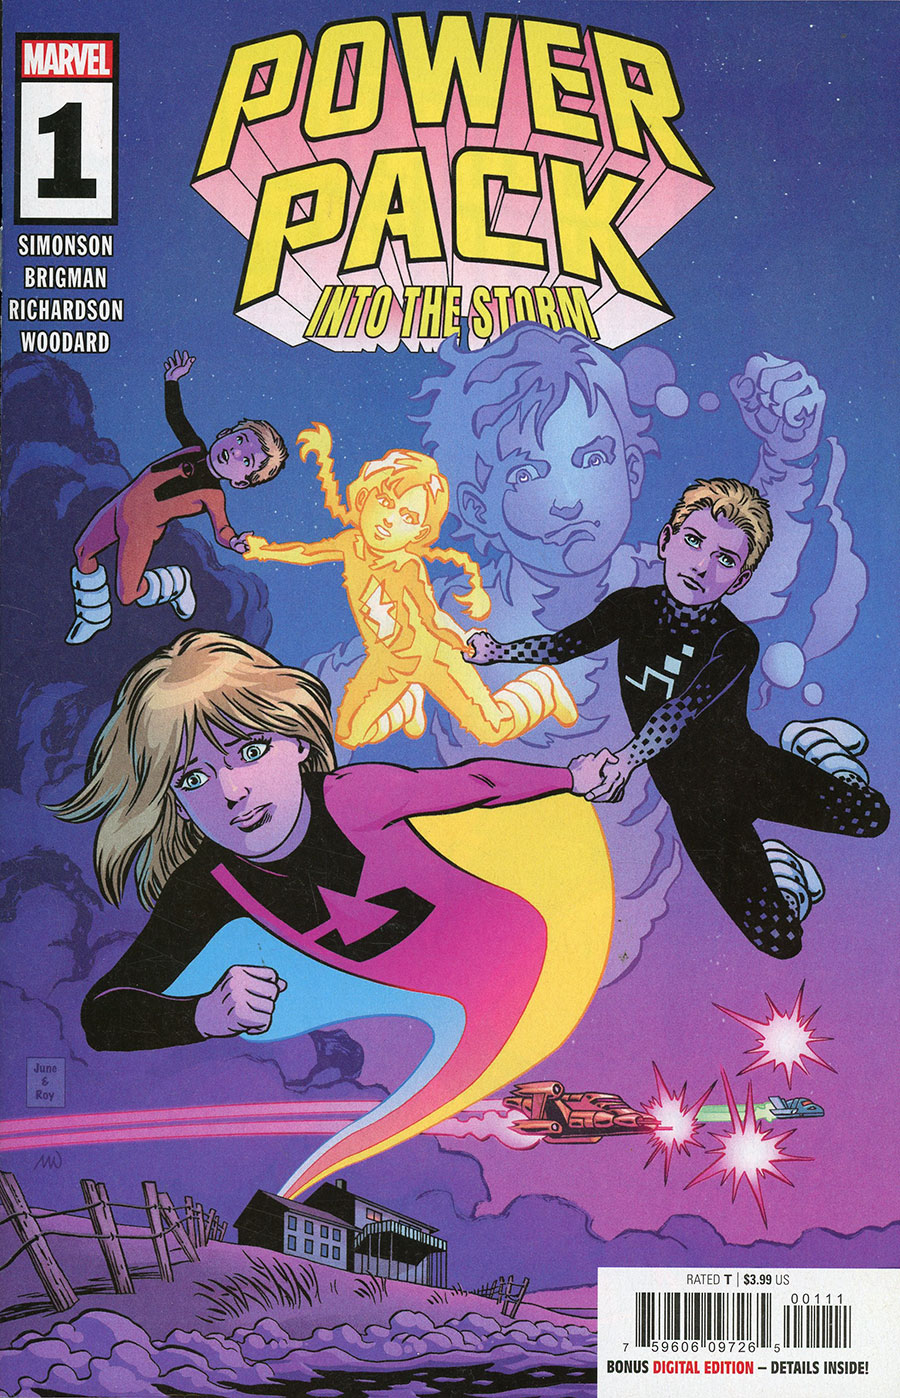 Power Pack Into The Storm #1 Cover A Regular June Brigman Cover